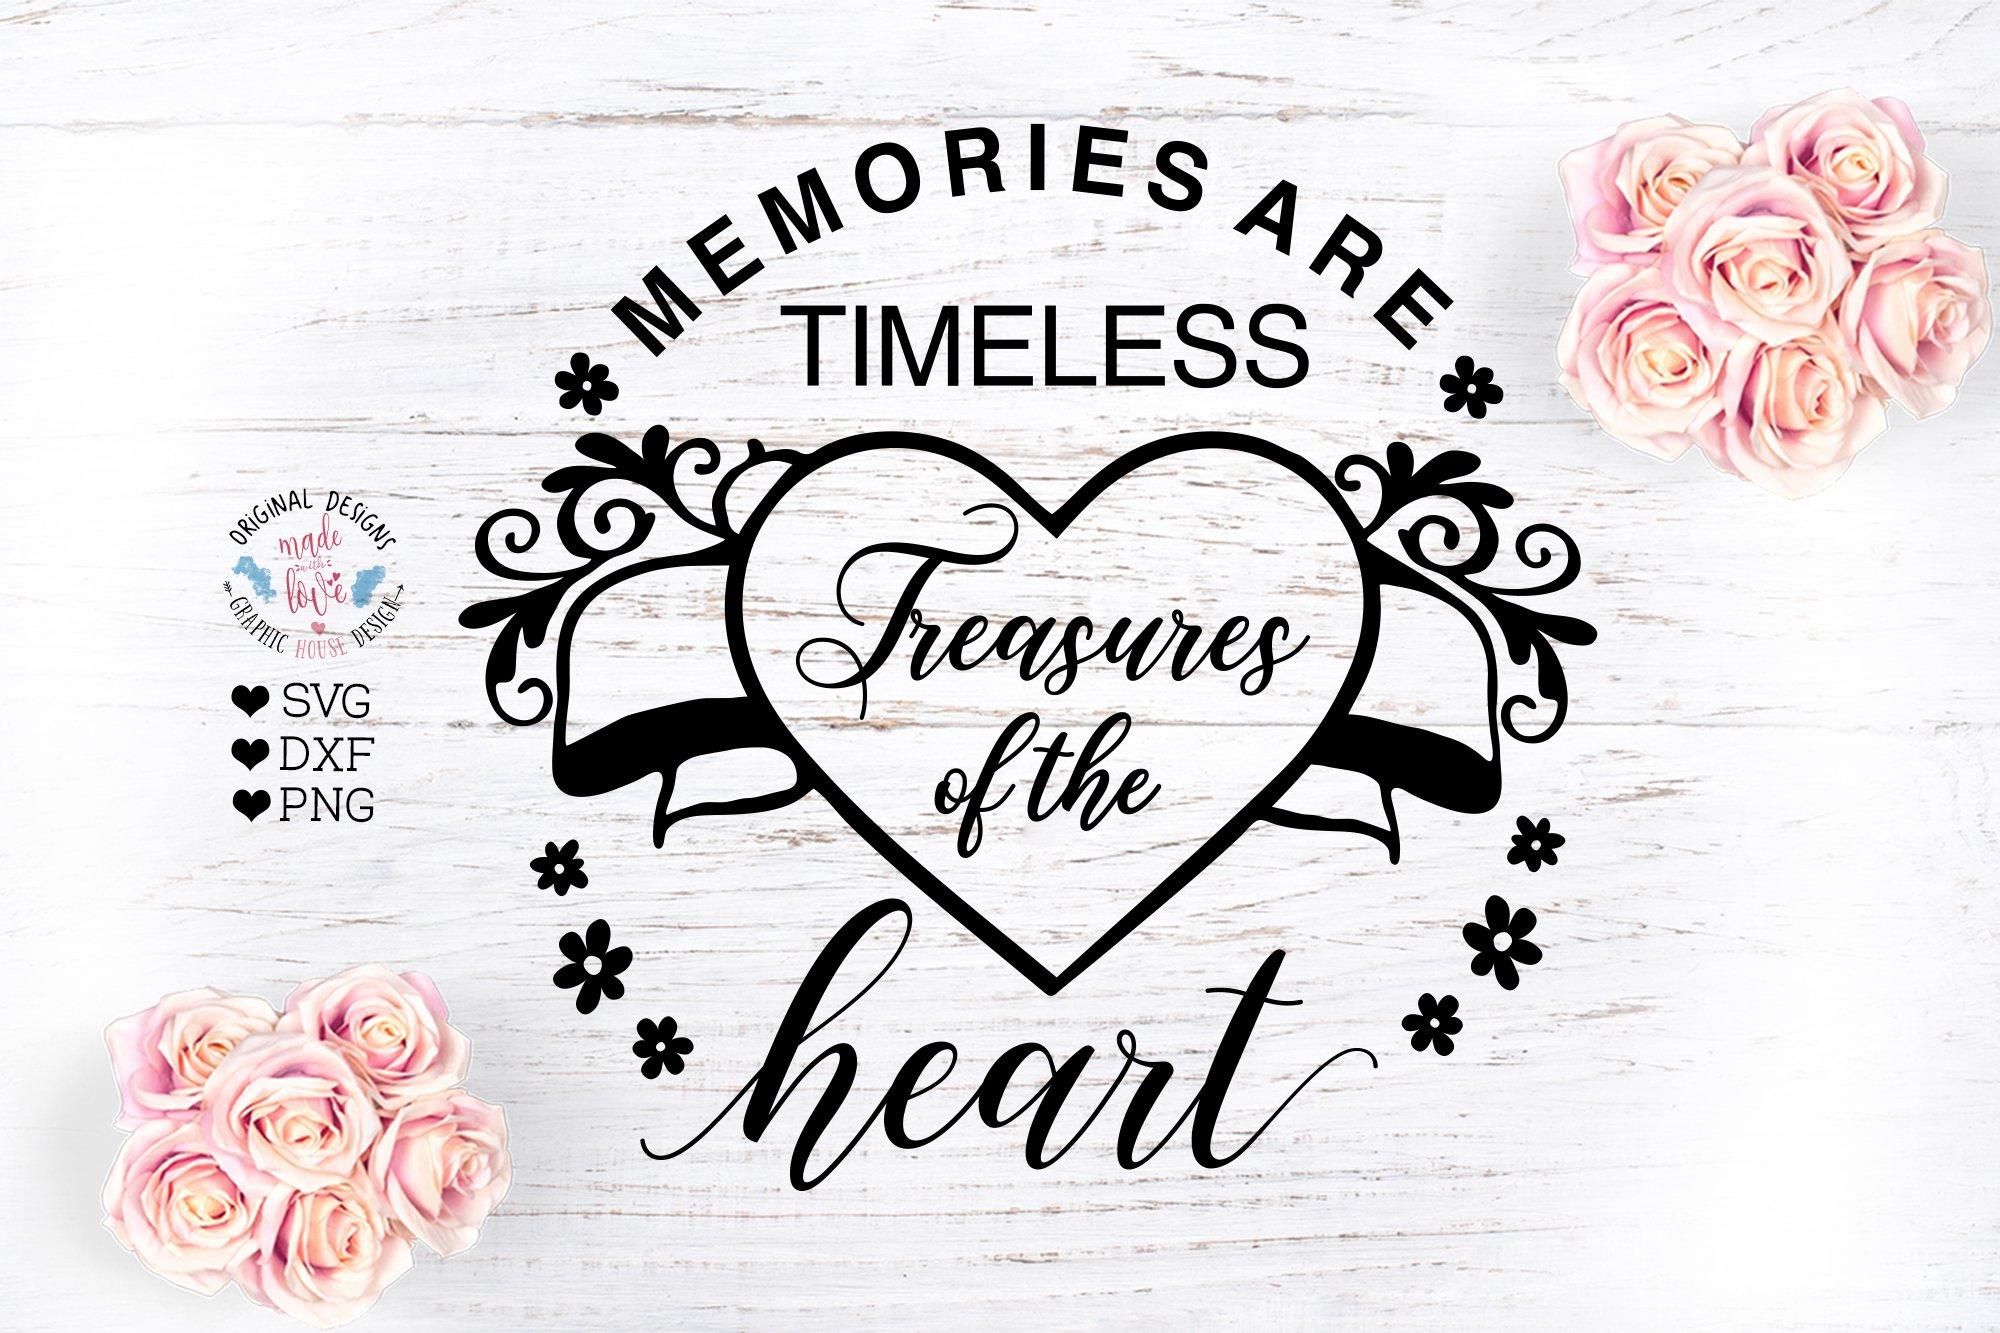 Download Memories Are Timeless Treasures Of The Heart So Fontsy